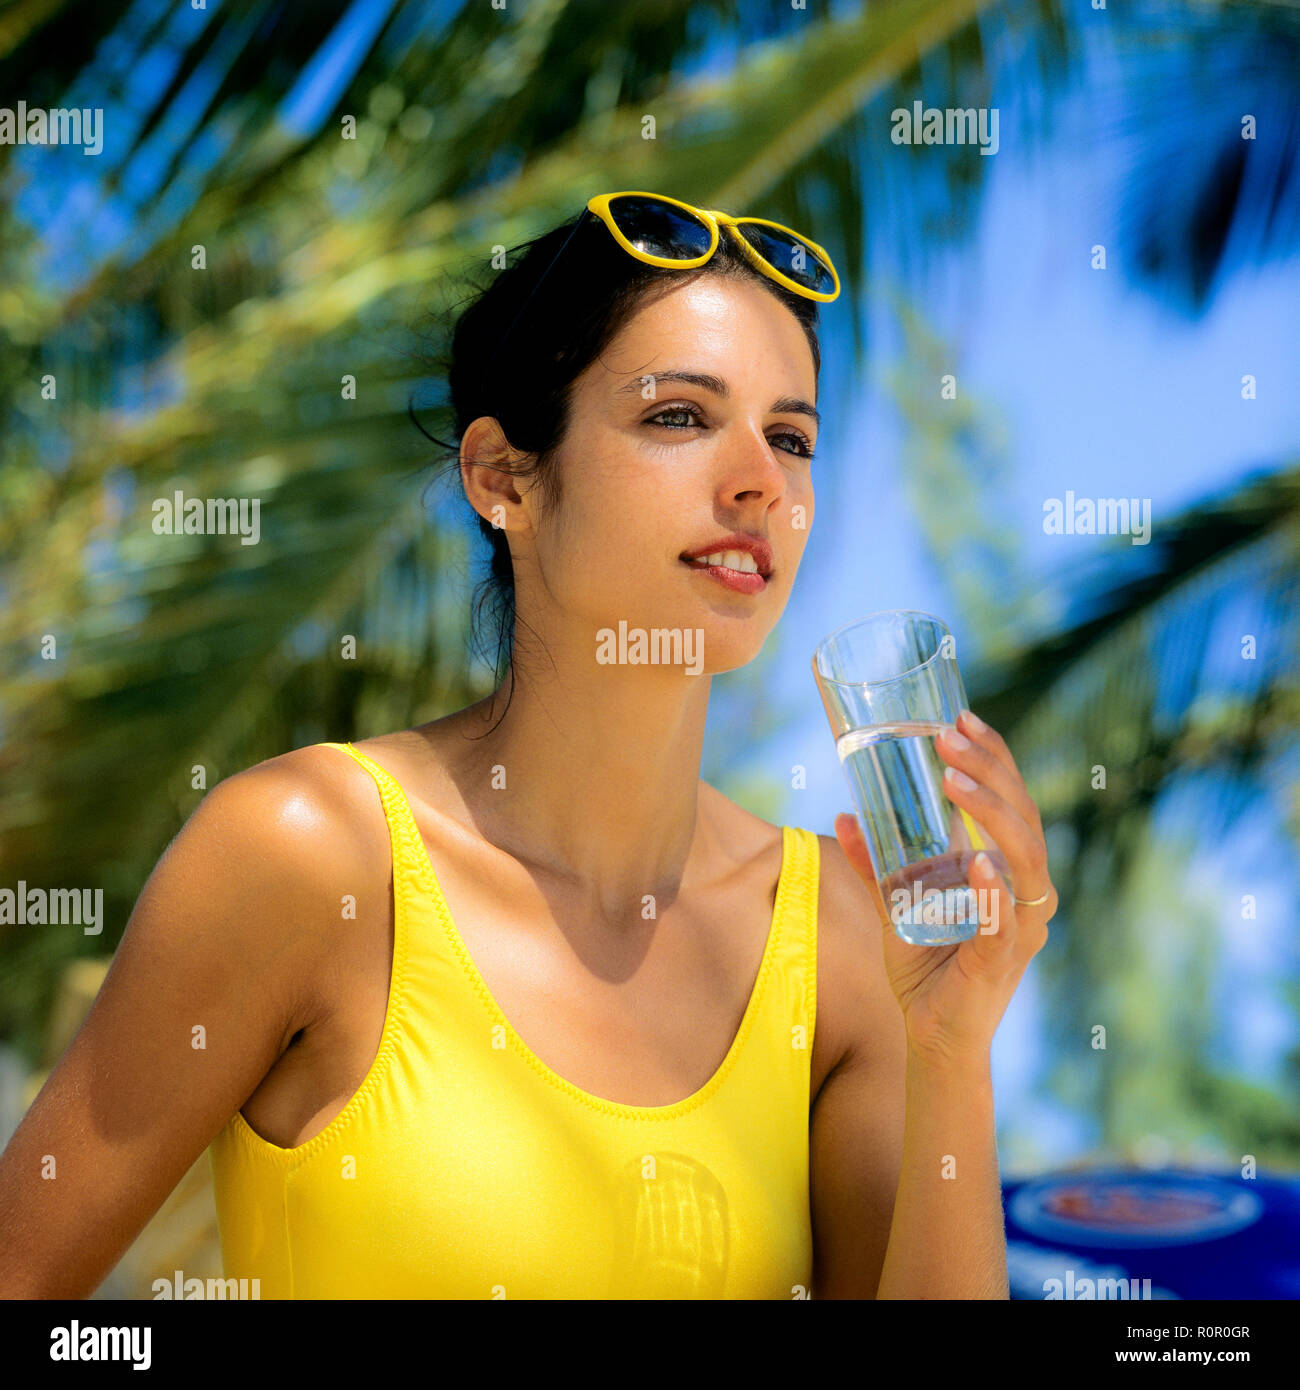 Young woman with yellow swimsuit holding a glass of water, palm trees background, Guadeloupe, French West Indies, Stock Photo